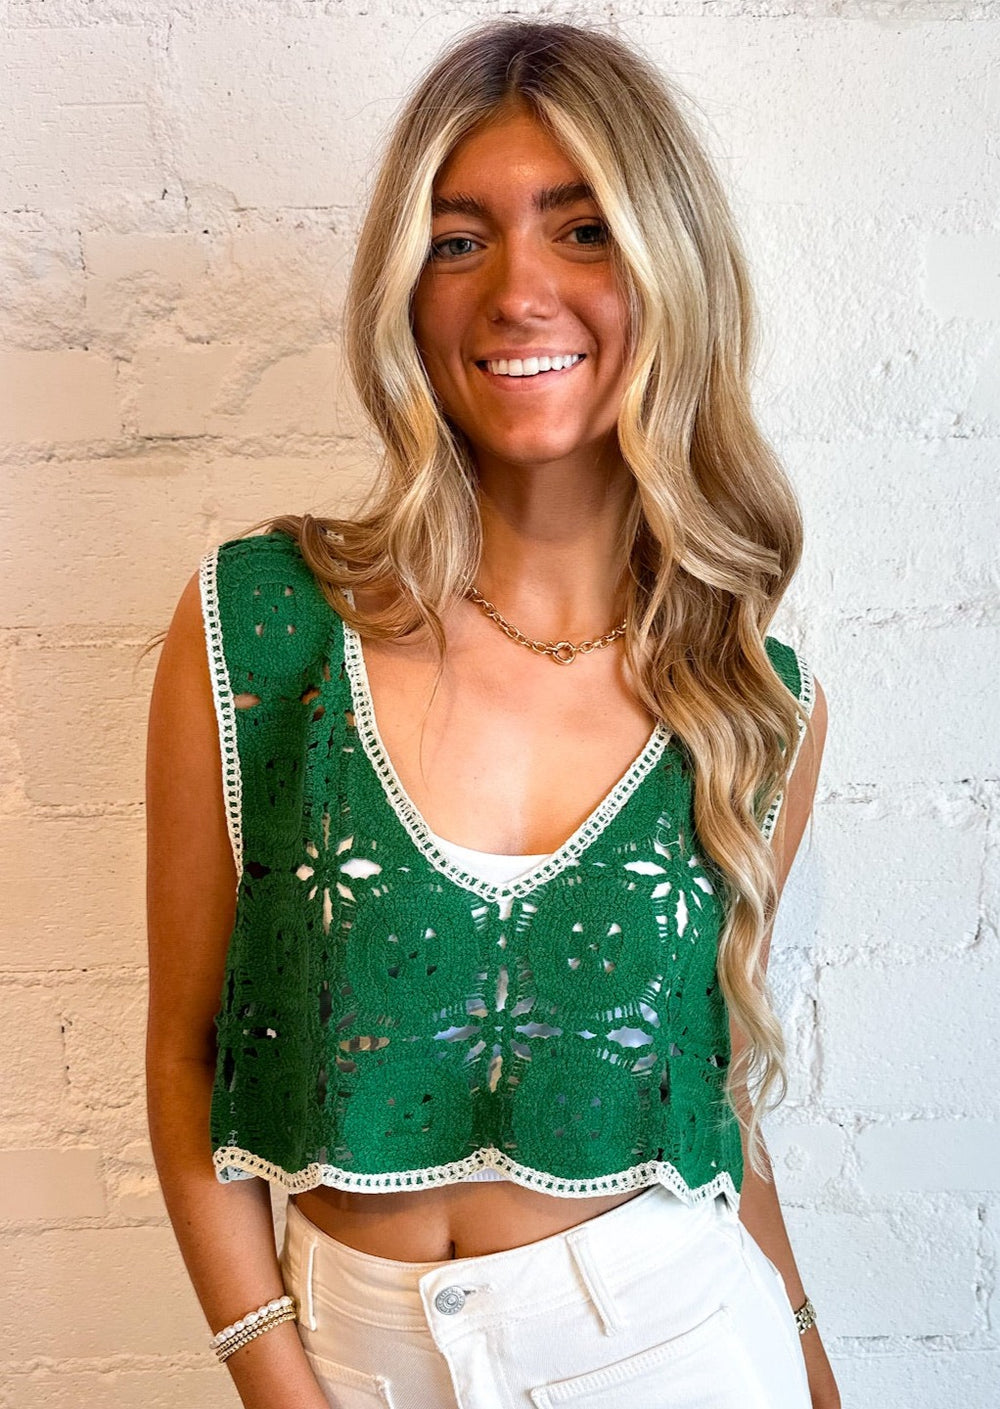 Mossy Crochet Top, Tops, Adeline, Adeline, dallas boutique, dallas texas, texas boutique, women's boutique dallas, adeline boutique, dallas boutique, trendy boutique, affordable boutique